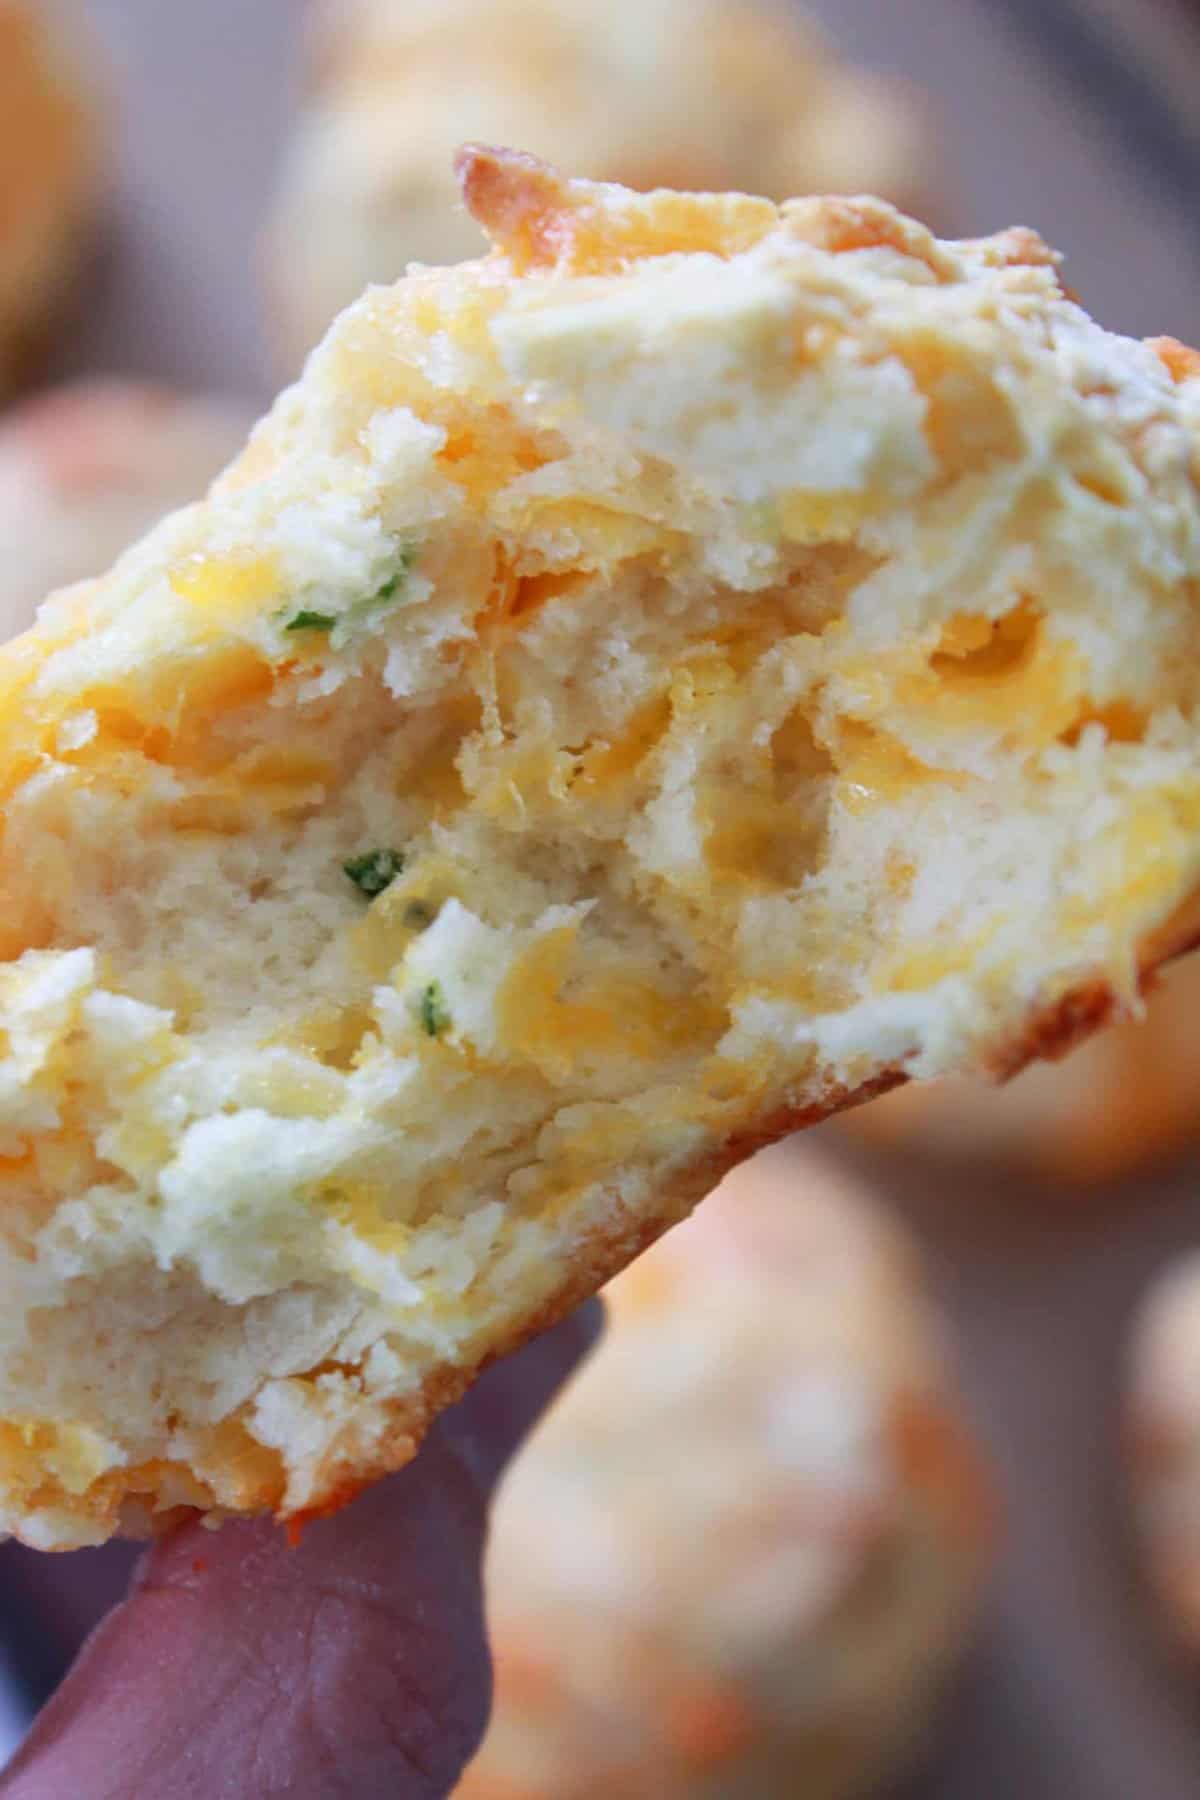 A cheddar and chive mini Irish soda biscuit being held up. 